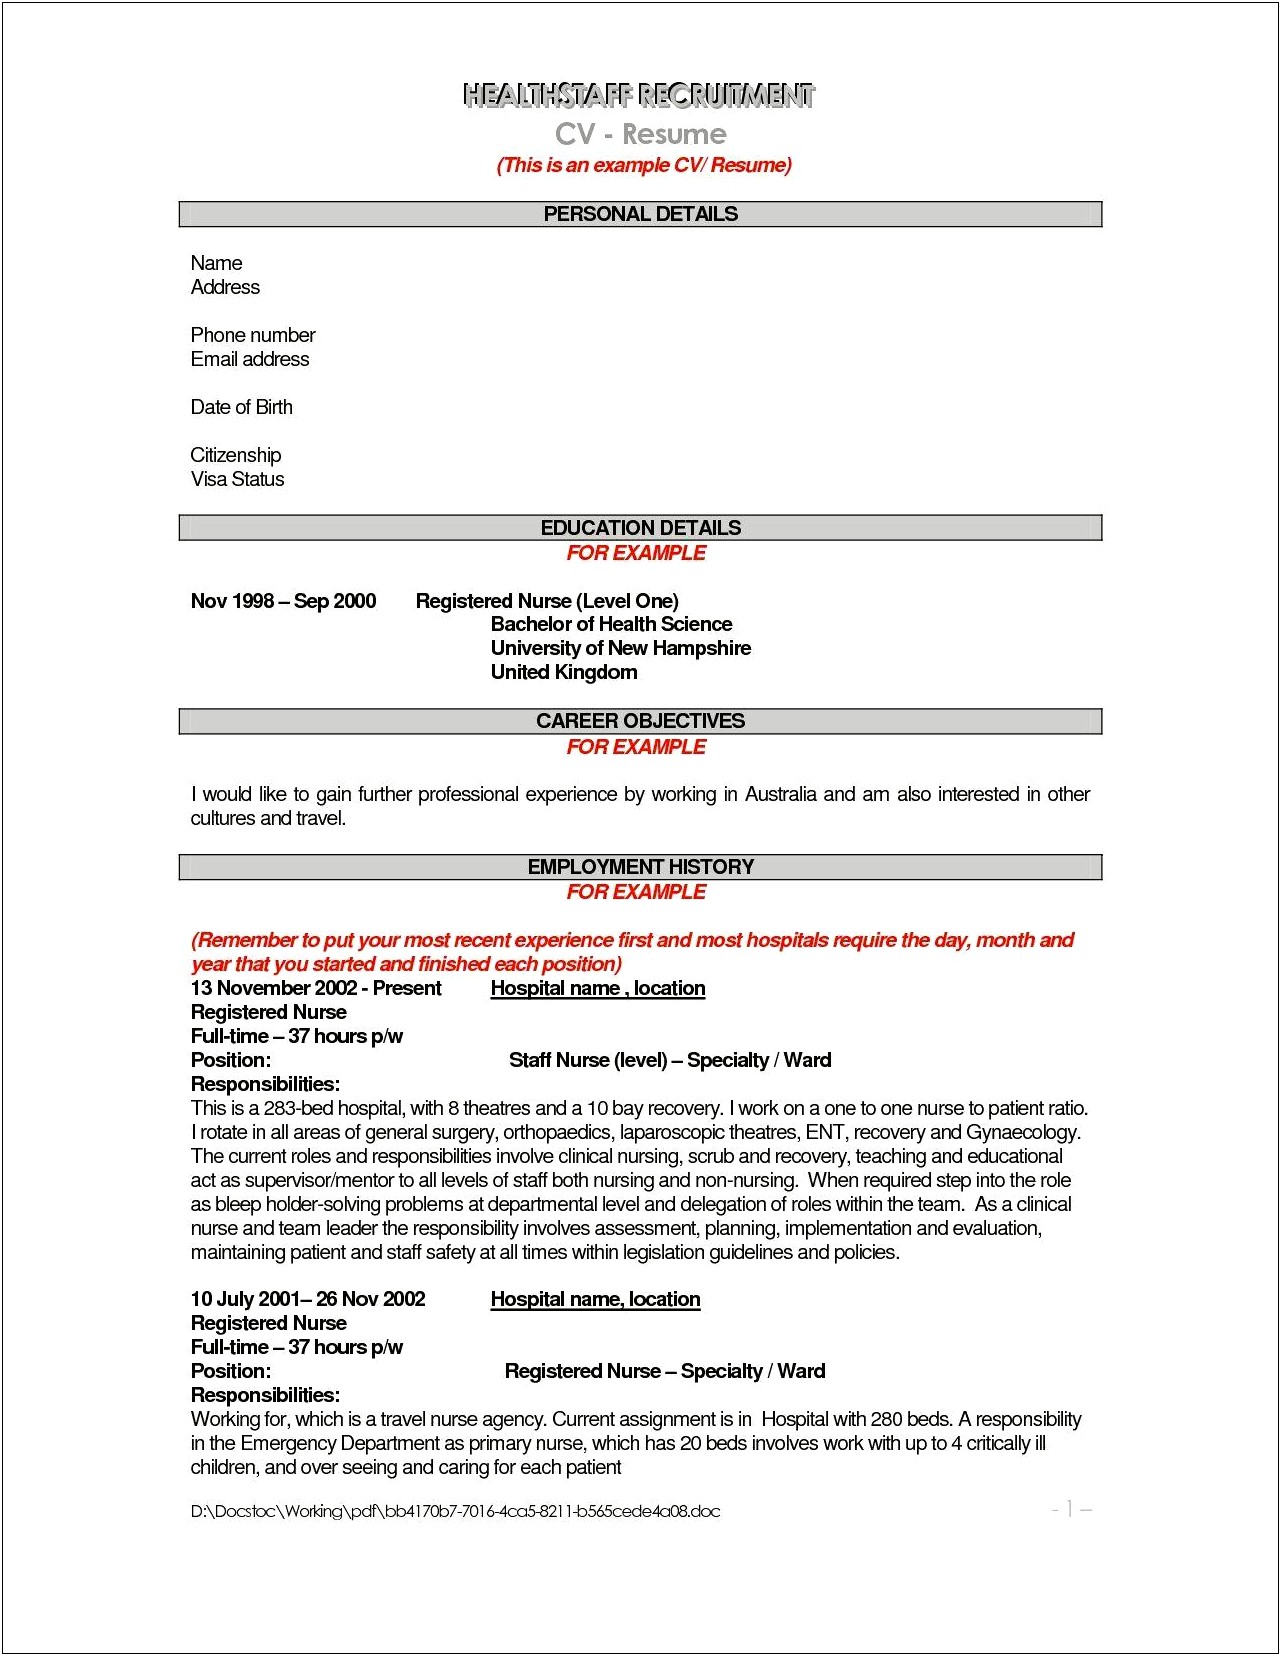 Examples Of Employment Objectives For Resume